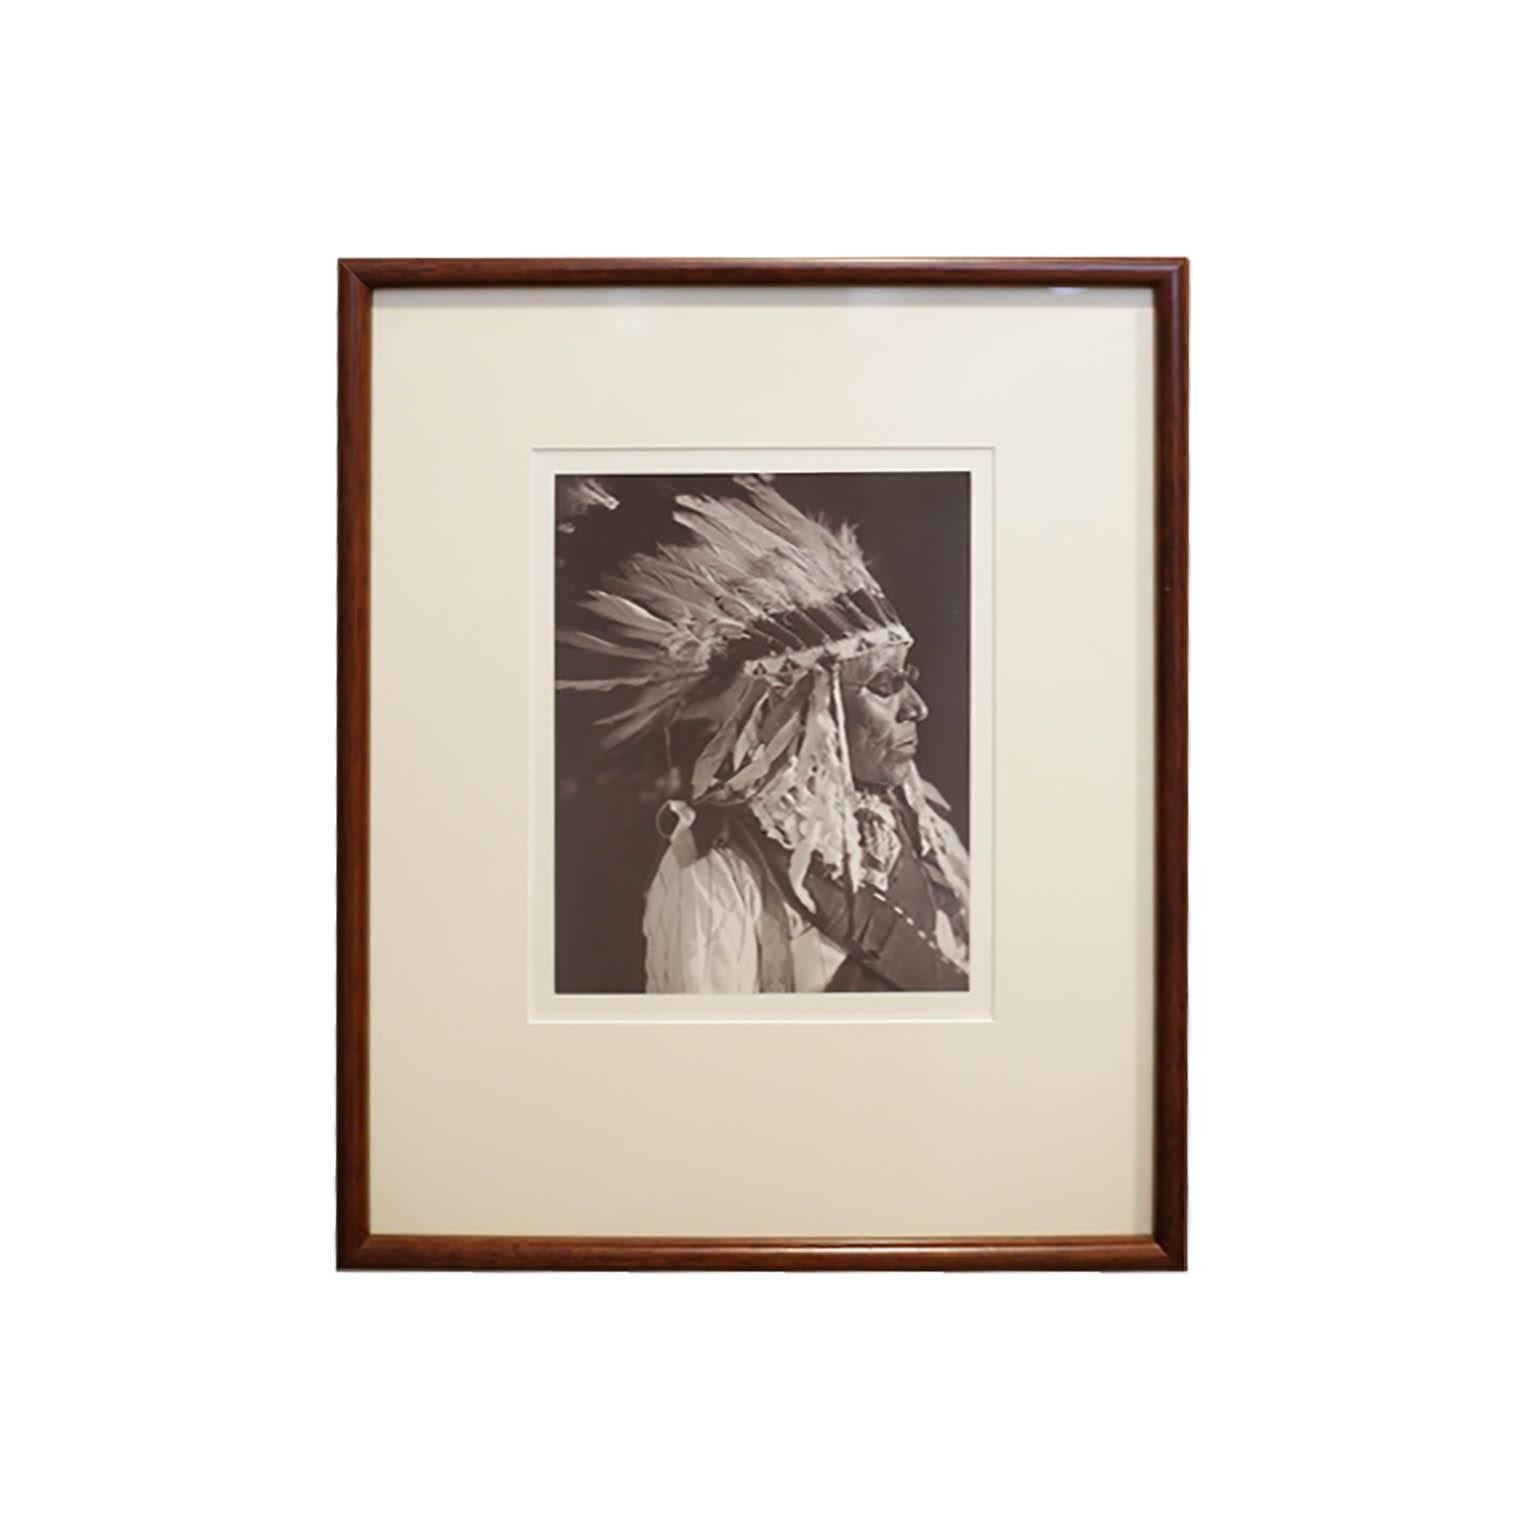 Early 20th century set of three photographs depicting Sioux Native Americans, one wearing glasses, and one self portrait of Frank Bennett Fiske (AMERICAN, 1883-1952).  
Each professionally framed. 

Career
Fiske was apprenticed to Stephen T.